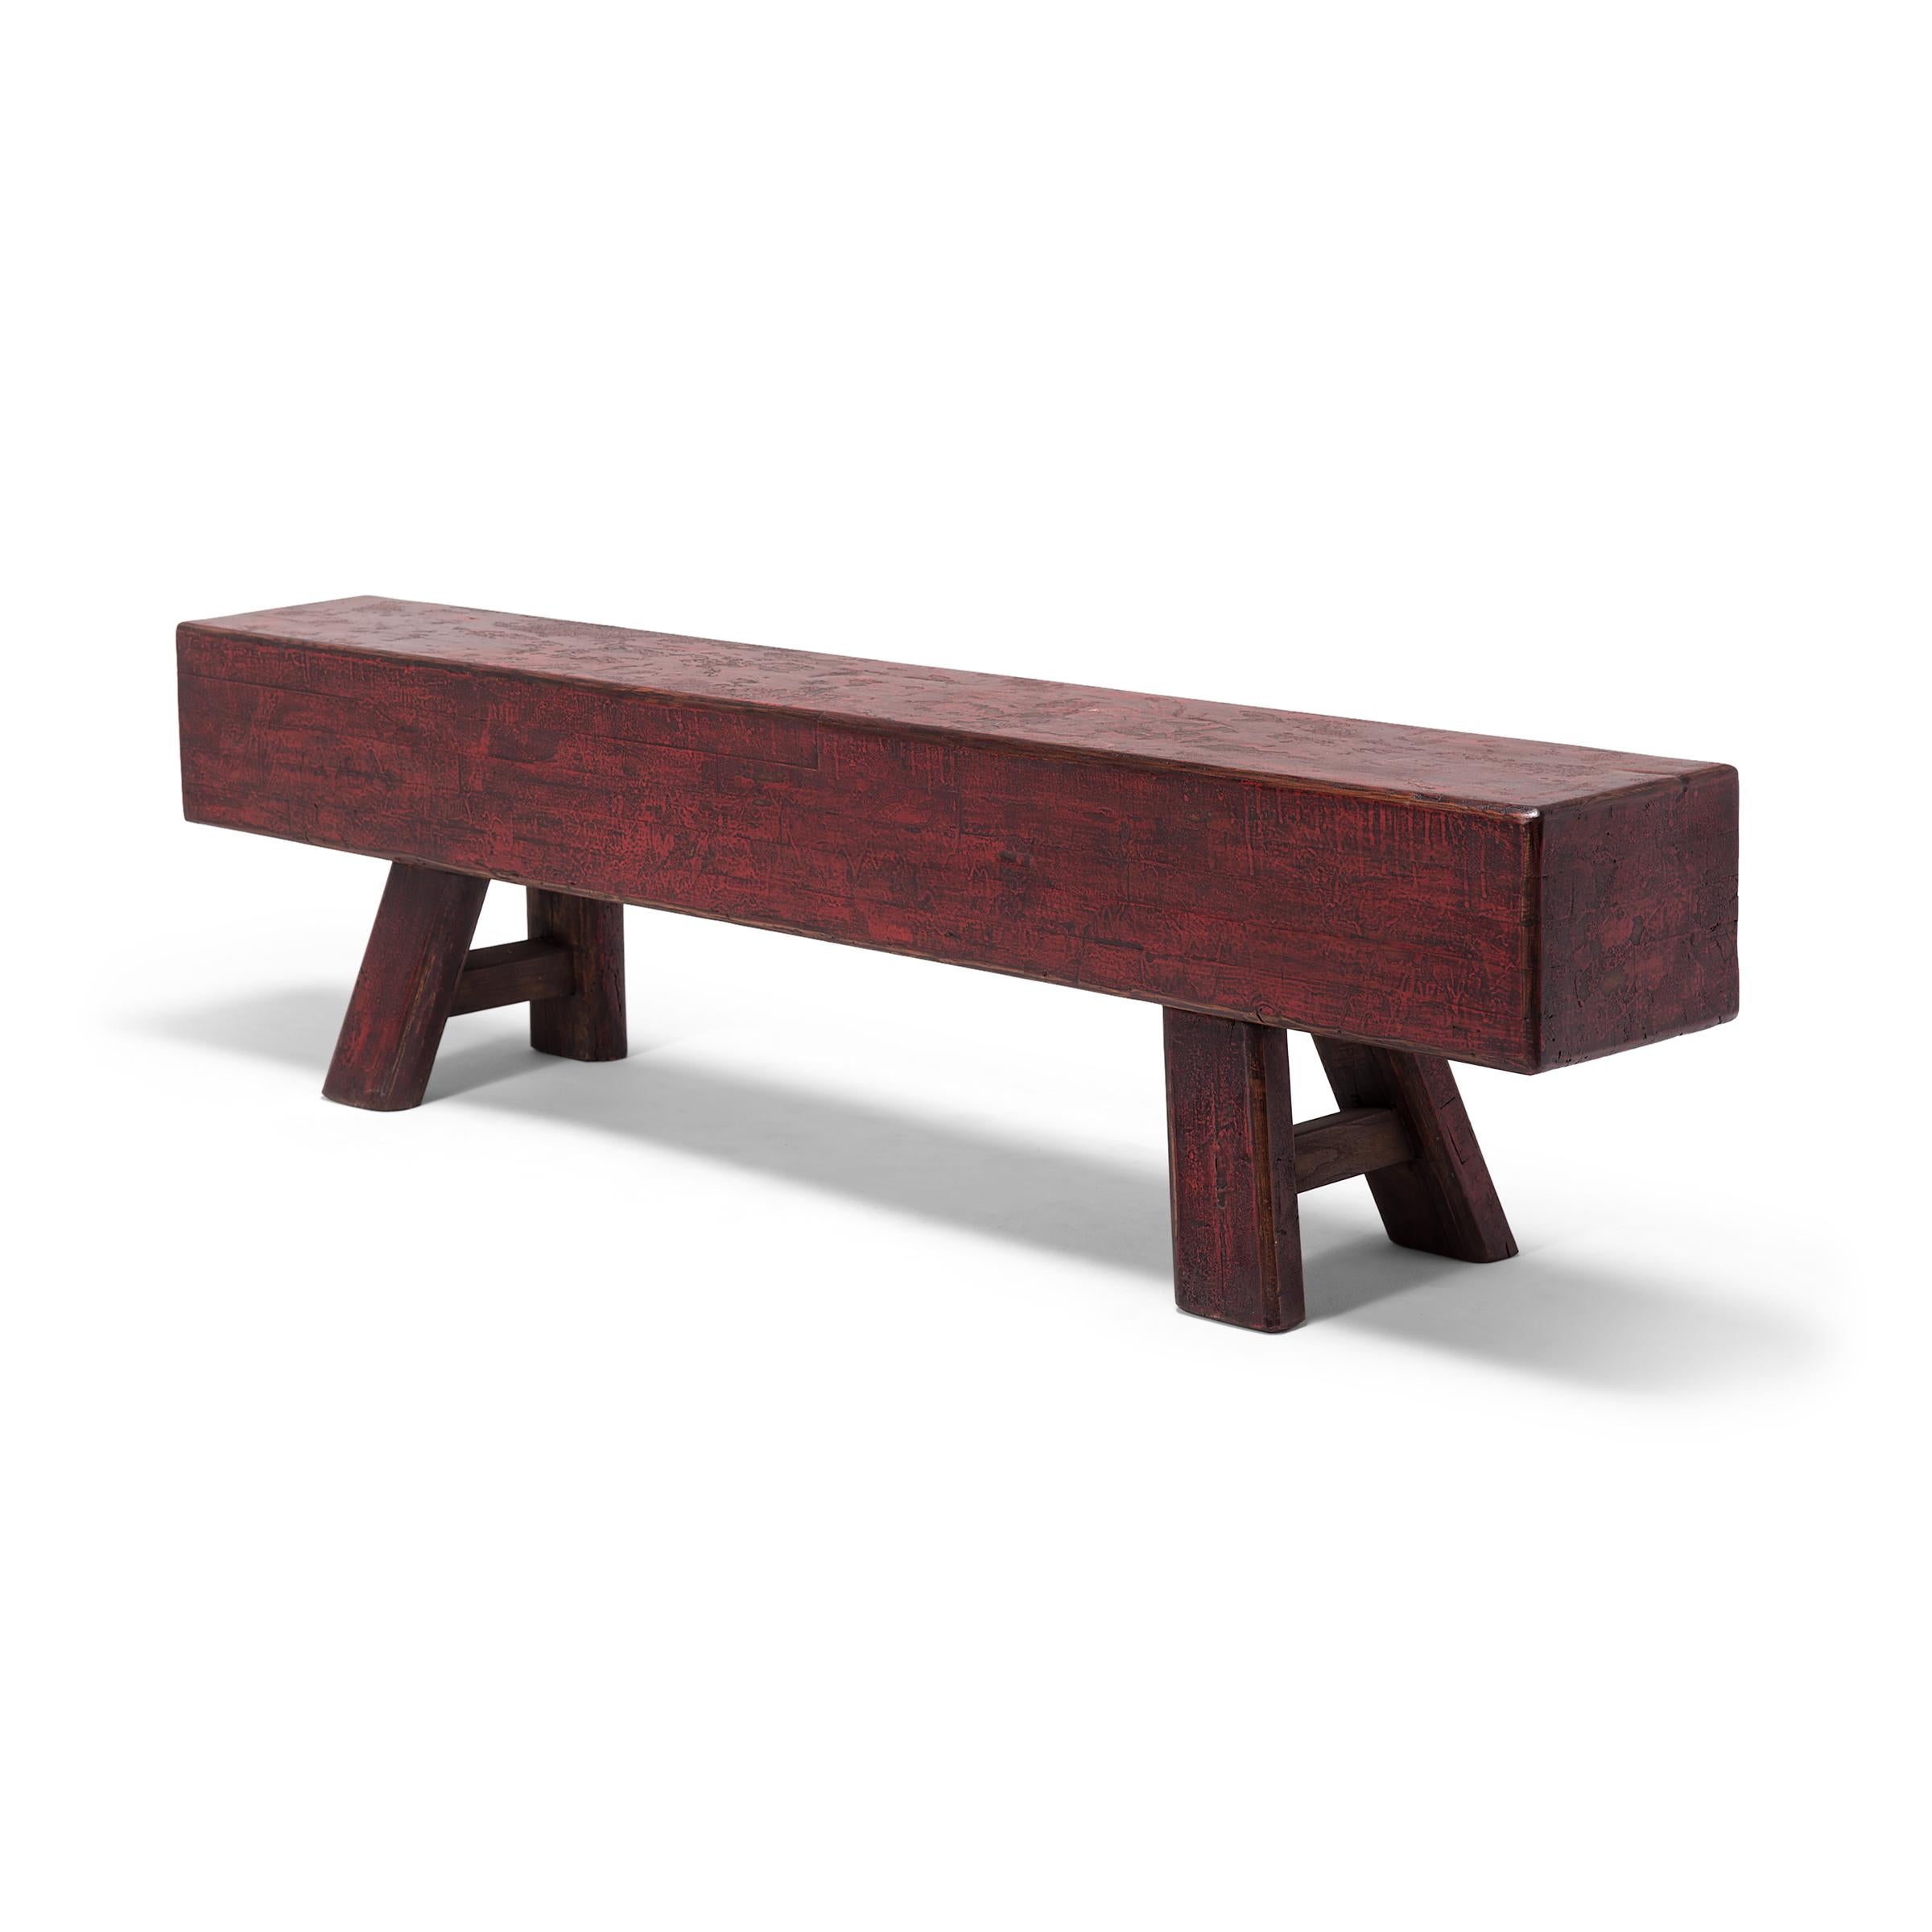 This grand red lacquer bench once provided versatile seating in the courtyard of a Qing-dynasty home. Not only was the sizable bench able to seat many guests during outdoor ceremonies, its imposing form could be used to barricade the home's tall